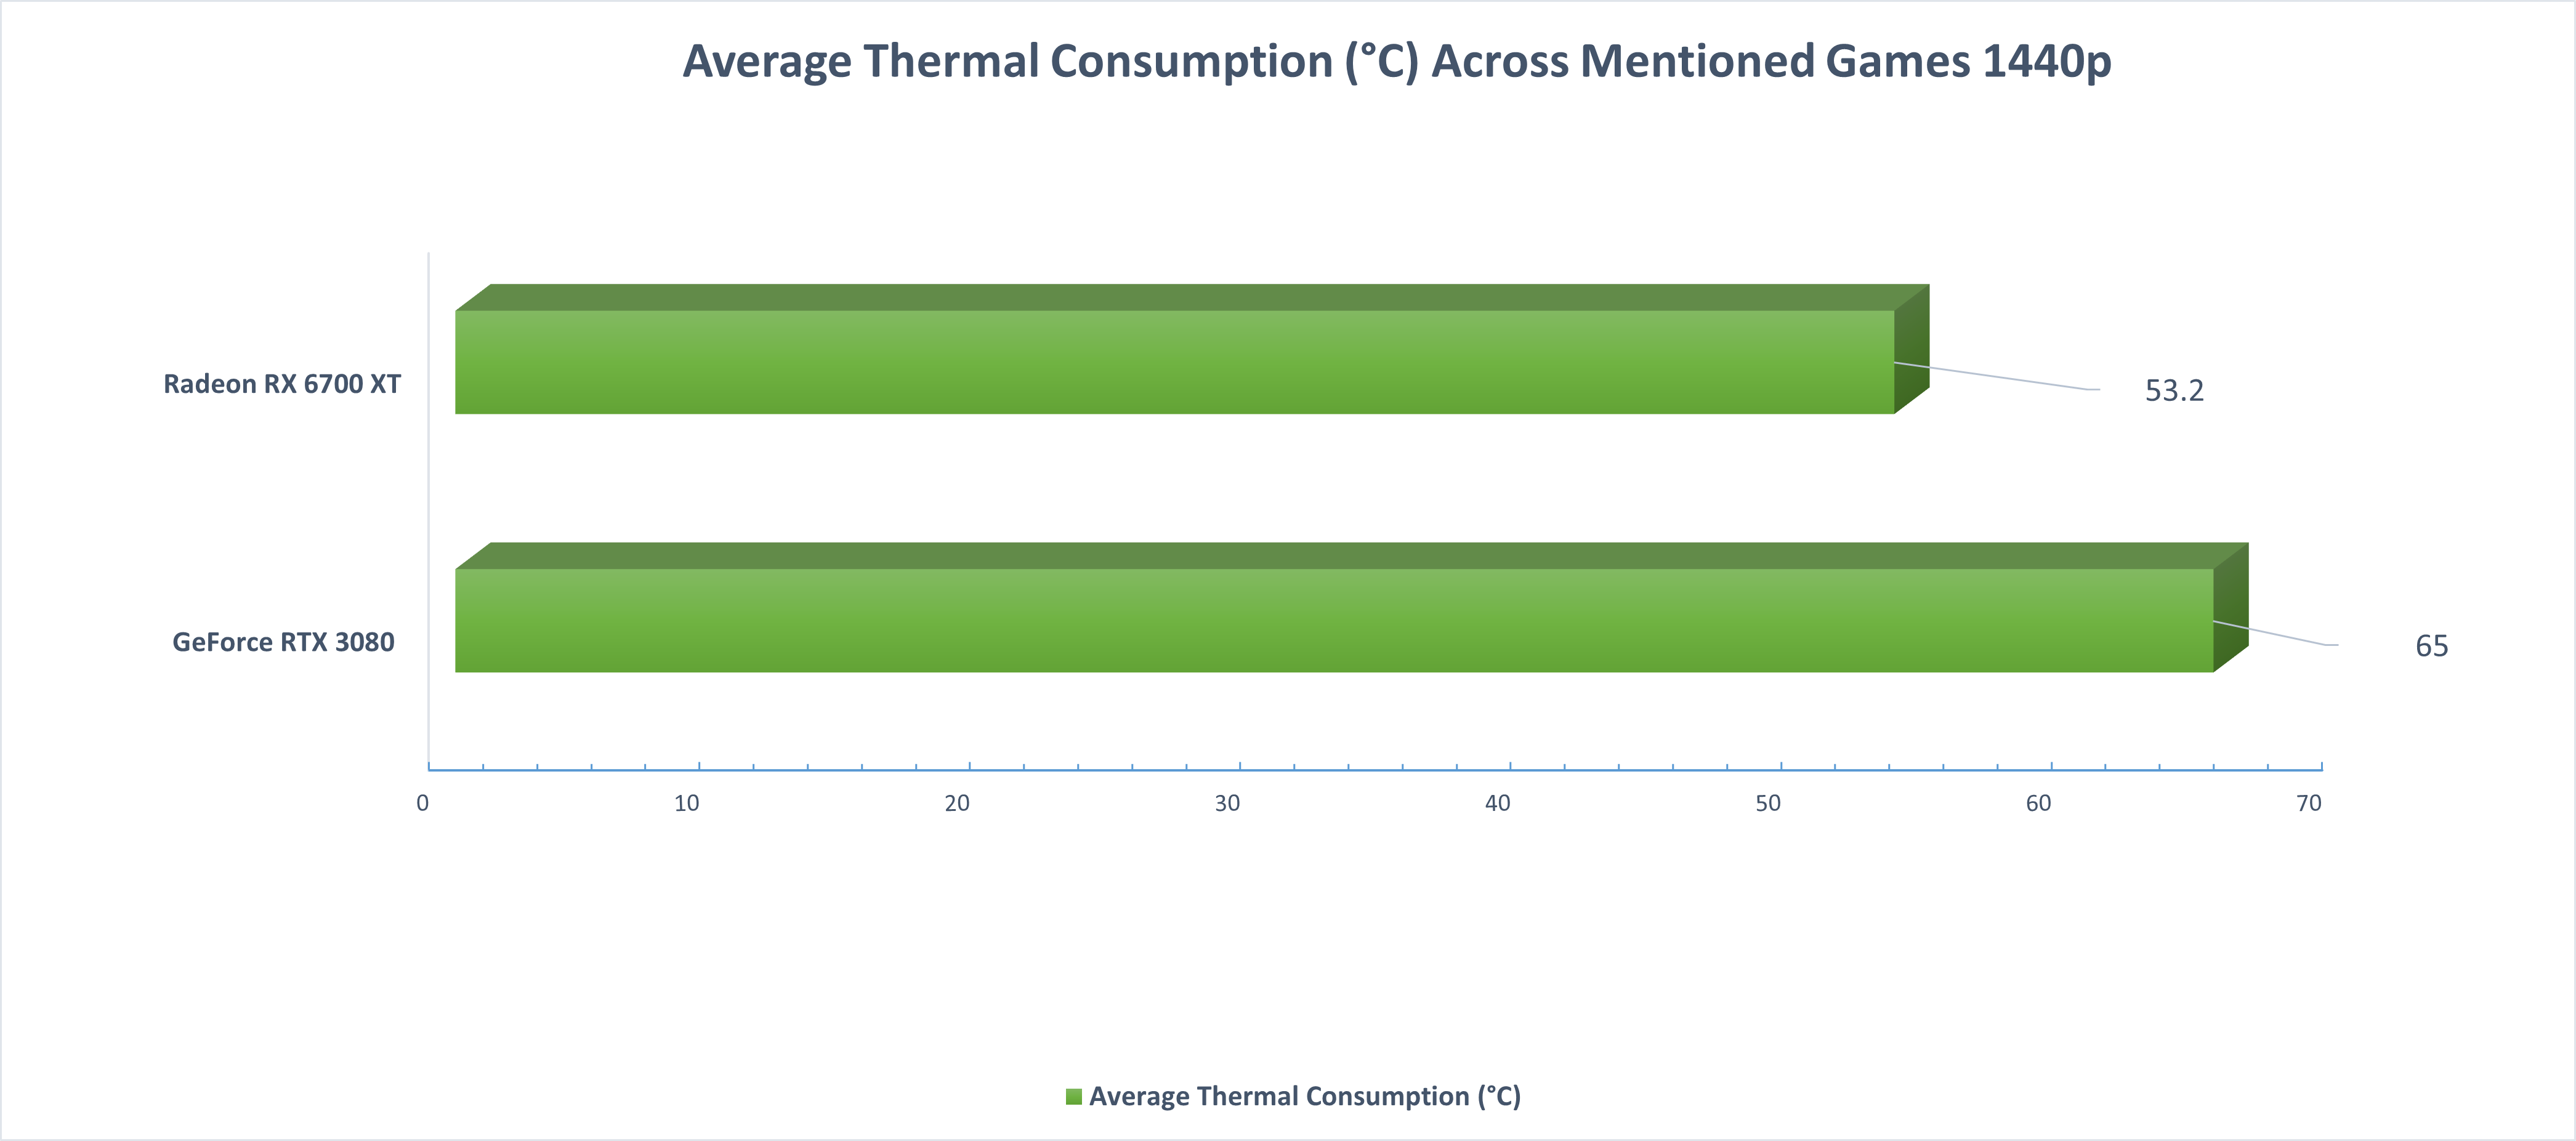 Average Thermal Statistics Across Mentioned Games